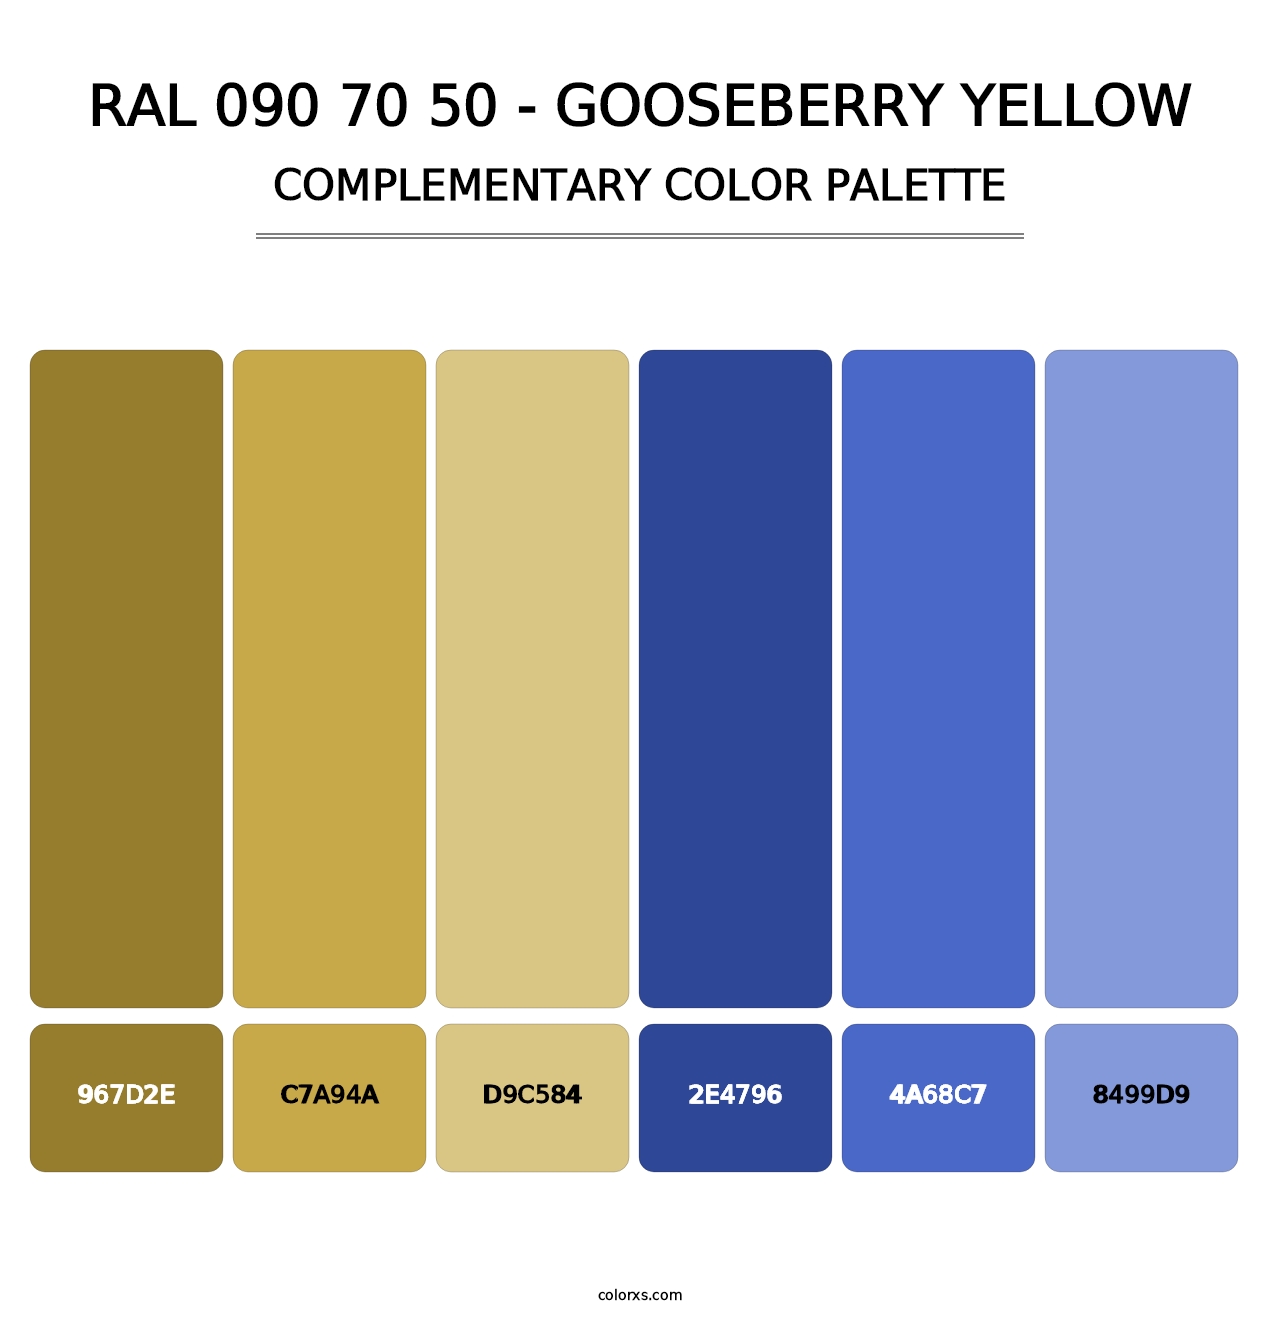 RAL 090 70 50 - Gooseberry Yellow - Complementary Color Palette